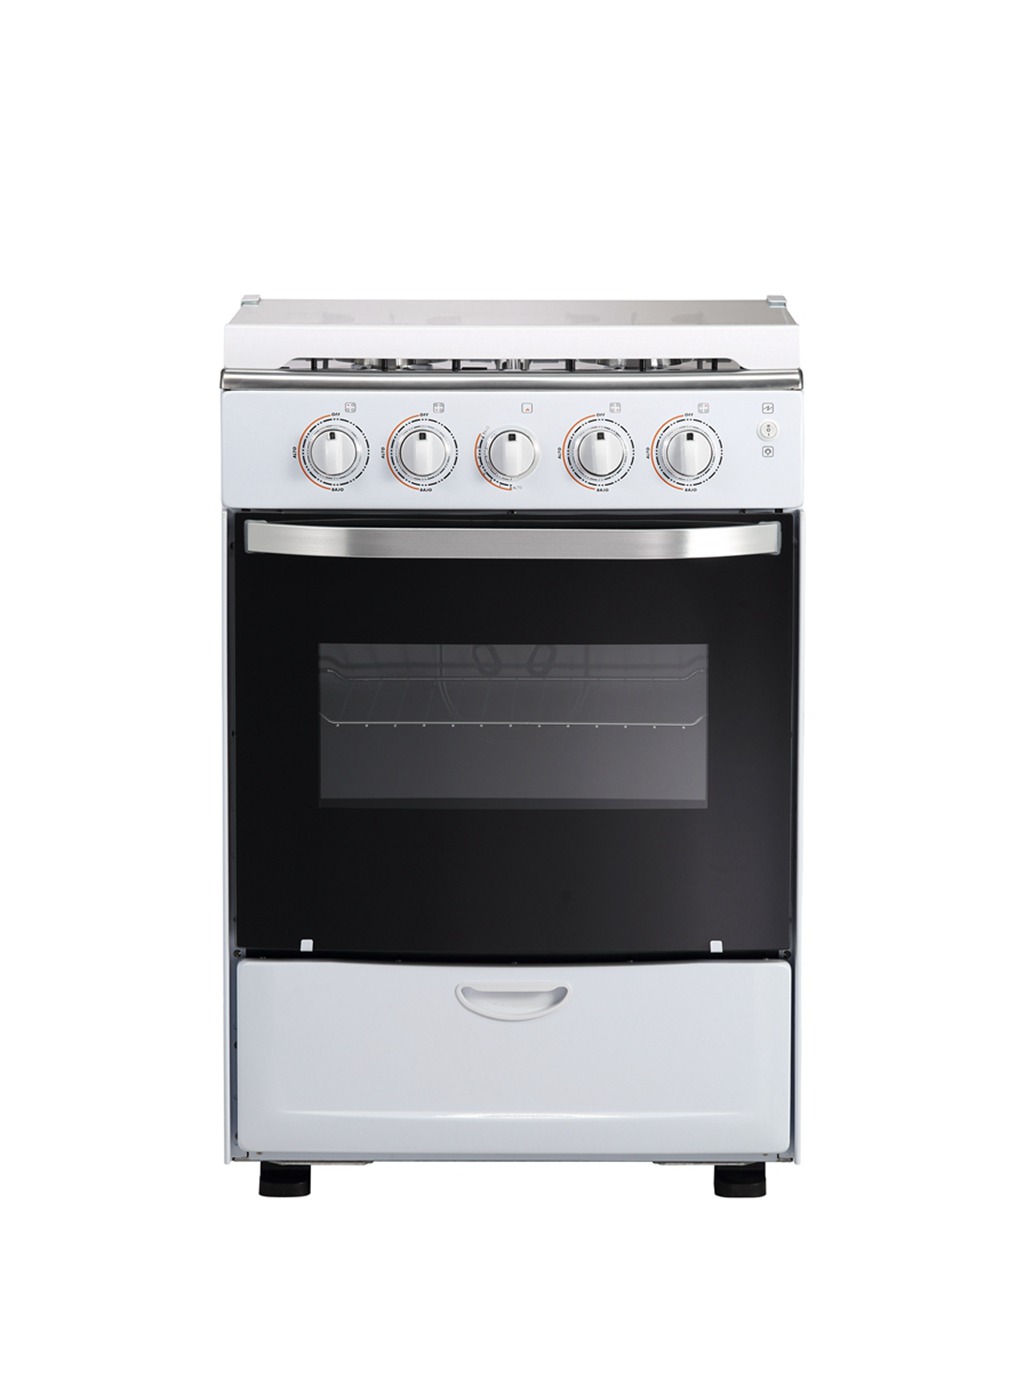 4 Burner Kitchen Gas Stove With Oven